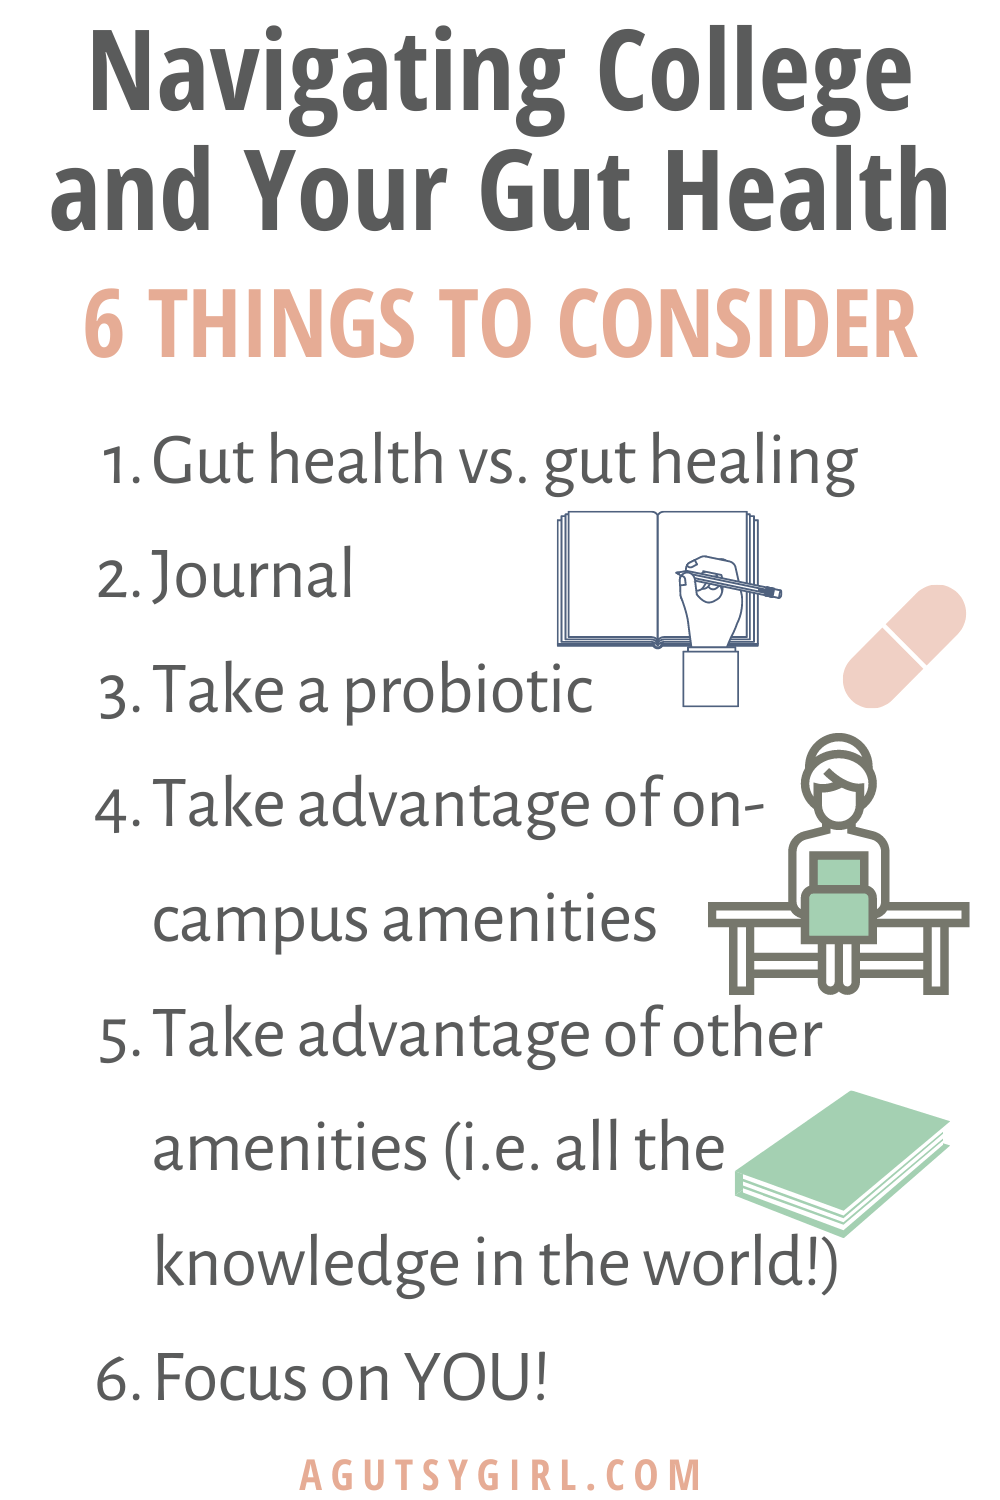 Navigating College A College Girl’s Master Guide to Gut Health agutsygirl.com #guthealth #guthealing #college